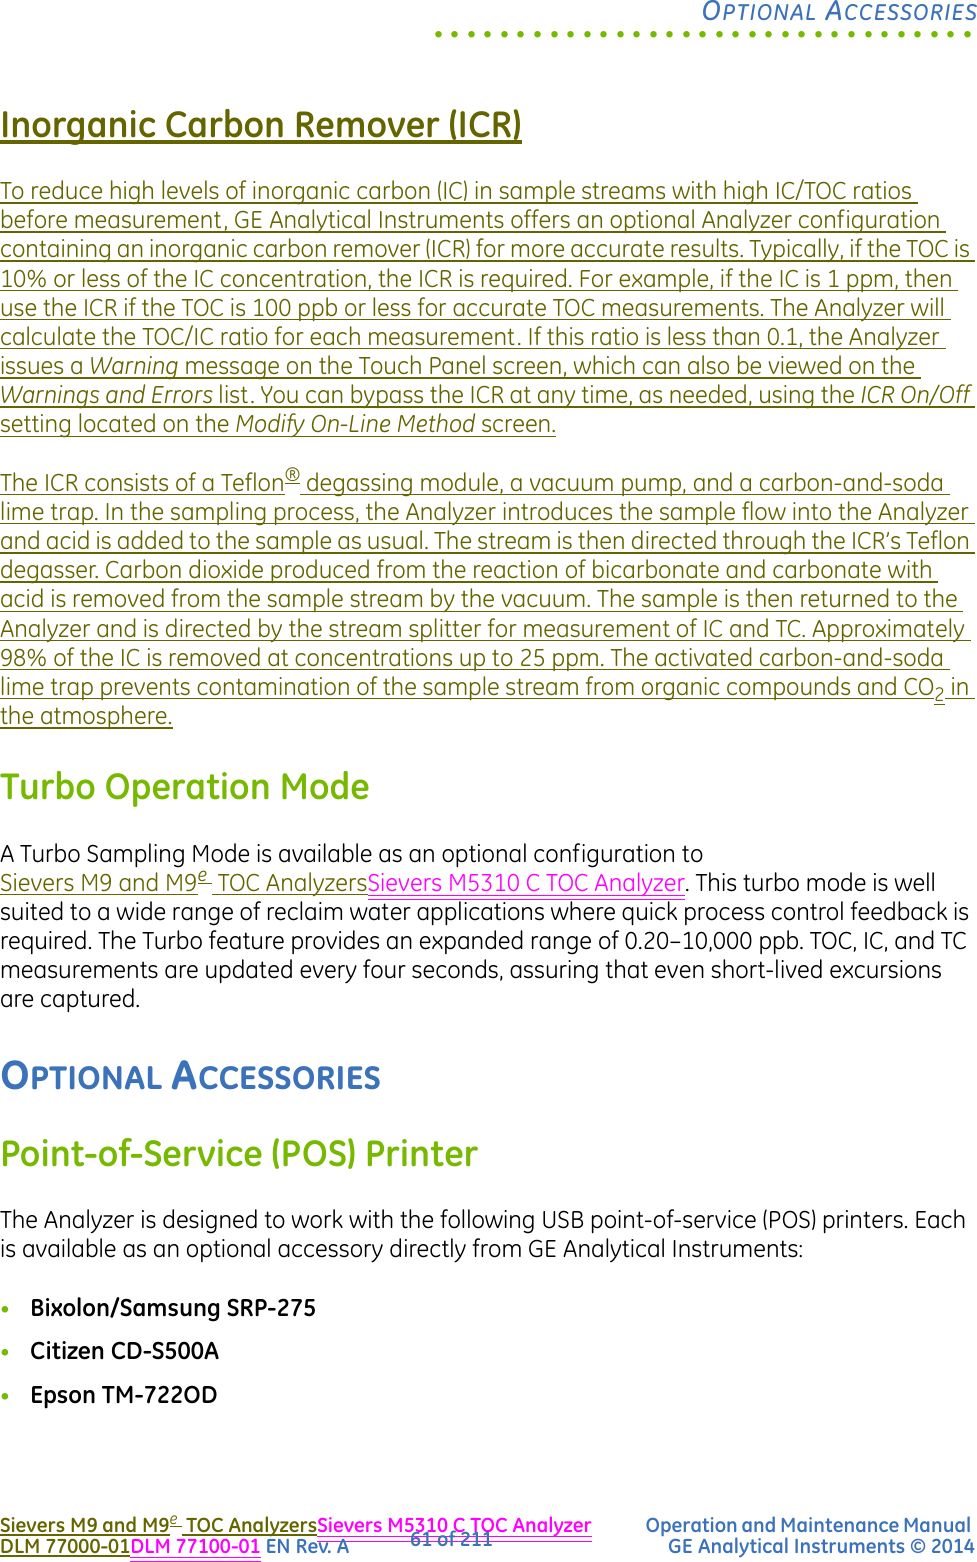 .................................OPTIONAL ACCESSORIESSievers M9 and M9eTOC AnalyzersSievers M5310 C TOC Analyzer Operation and Maintenance Manual DLM 77000-01DLM 77100-01 EN Rev. A GE Analytical Instruments © 201461 of 211Inorganic Carbon Remover (ICR)To reduce high levels of inorganic carbon (IC) in sample streams with high IC/TOC ratios before measurement, GE Analytical Instruments offers an optional Analyzer configuration containing an inorganic carbon remover (ICR) for more accurate results. Typically, if the TOC is 10% or less of the IC concentration, the ICR is required. For example, if the IC is 1 ppm, then use the ICR if the TOC is 100 ppb or less for accurate TOC measurements. The Analyzer will calculate the TOC/IC ratio for each measurement. If this ratio is less than 0.1, the Analyzer issues a Warning message on the Touch Panel screen, which can also be viewed on the Warnings and Errors list. You can bypass the ICR at any time, as needed, using the ICR On/Off setting located on the Modify On-Line Method screen.The ICR consists of a Teflon® degassing module, a vacuum pump, and a carbon-and-soda lime trap. In the sampling process, the Analyzer introduces the sample flow into the Analyzer and acid is added to the sample as usual. The stream is then directed through the ICR’s Teflon degasser. Carbon dioxide produced from the reaction of bicarbonate and carbonate with acid is removed from the sample stream by the vacuum. The sample is then returned to the Analyzer and is directed by the stream splitter for measurement of IC and TC. Approximately 98% of the IC is removed at concentrations up to 25 ppm. The activated carbon-and-soda lime trap prevents contamination of the sample stream from organic compounds and CO2 in the atmosphere.Turbo Operation ModeA Turbo Sampling Mode is available as an optional configuration to Sievers M9 and M9eTOC AnalyzersSievers M5310 C TOC Analyzer. This turbo mode is well suited to a wide range of reclaim water applications where quick process control feedback is required. The Turbo feature provides an expanded range of 0.20–10,000 ppb. TOC, IC, and TC measurements are updated every four seconds, assuring that even short-lived excursions are captured. OPTIONAL ACCESSORIESPoint-of-Service (POS) PrinterThe Analyzer is designed to work with the following USB point-of-service (POS) printers. Each is available as an optional accessory directly from GE Analytical Instruments:•Bixolon/Samsung SRP-275•Citizen CD-S500A•Epson TM-722OD